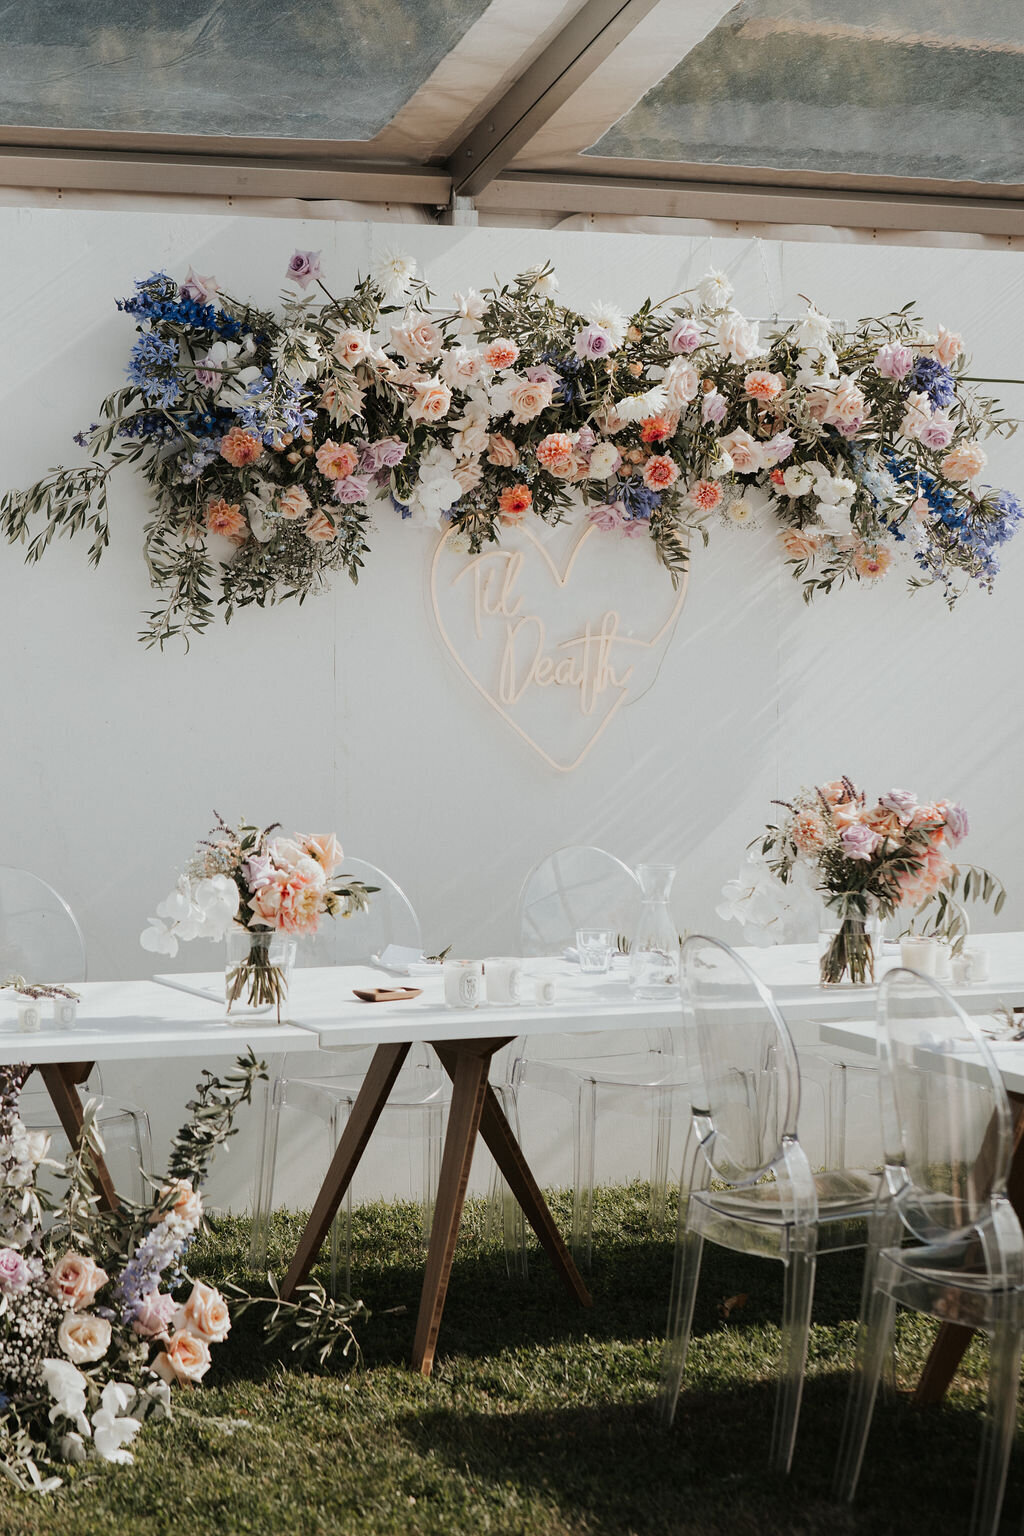 The Vase Floral Co - wedding reception table with floral arrangements and hanging flower design on wall